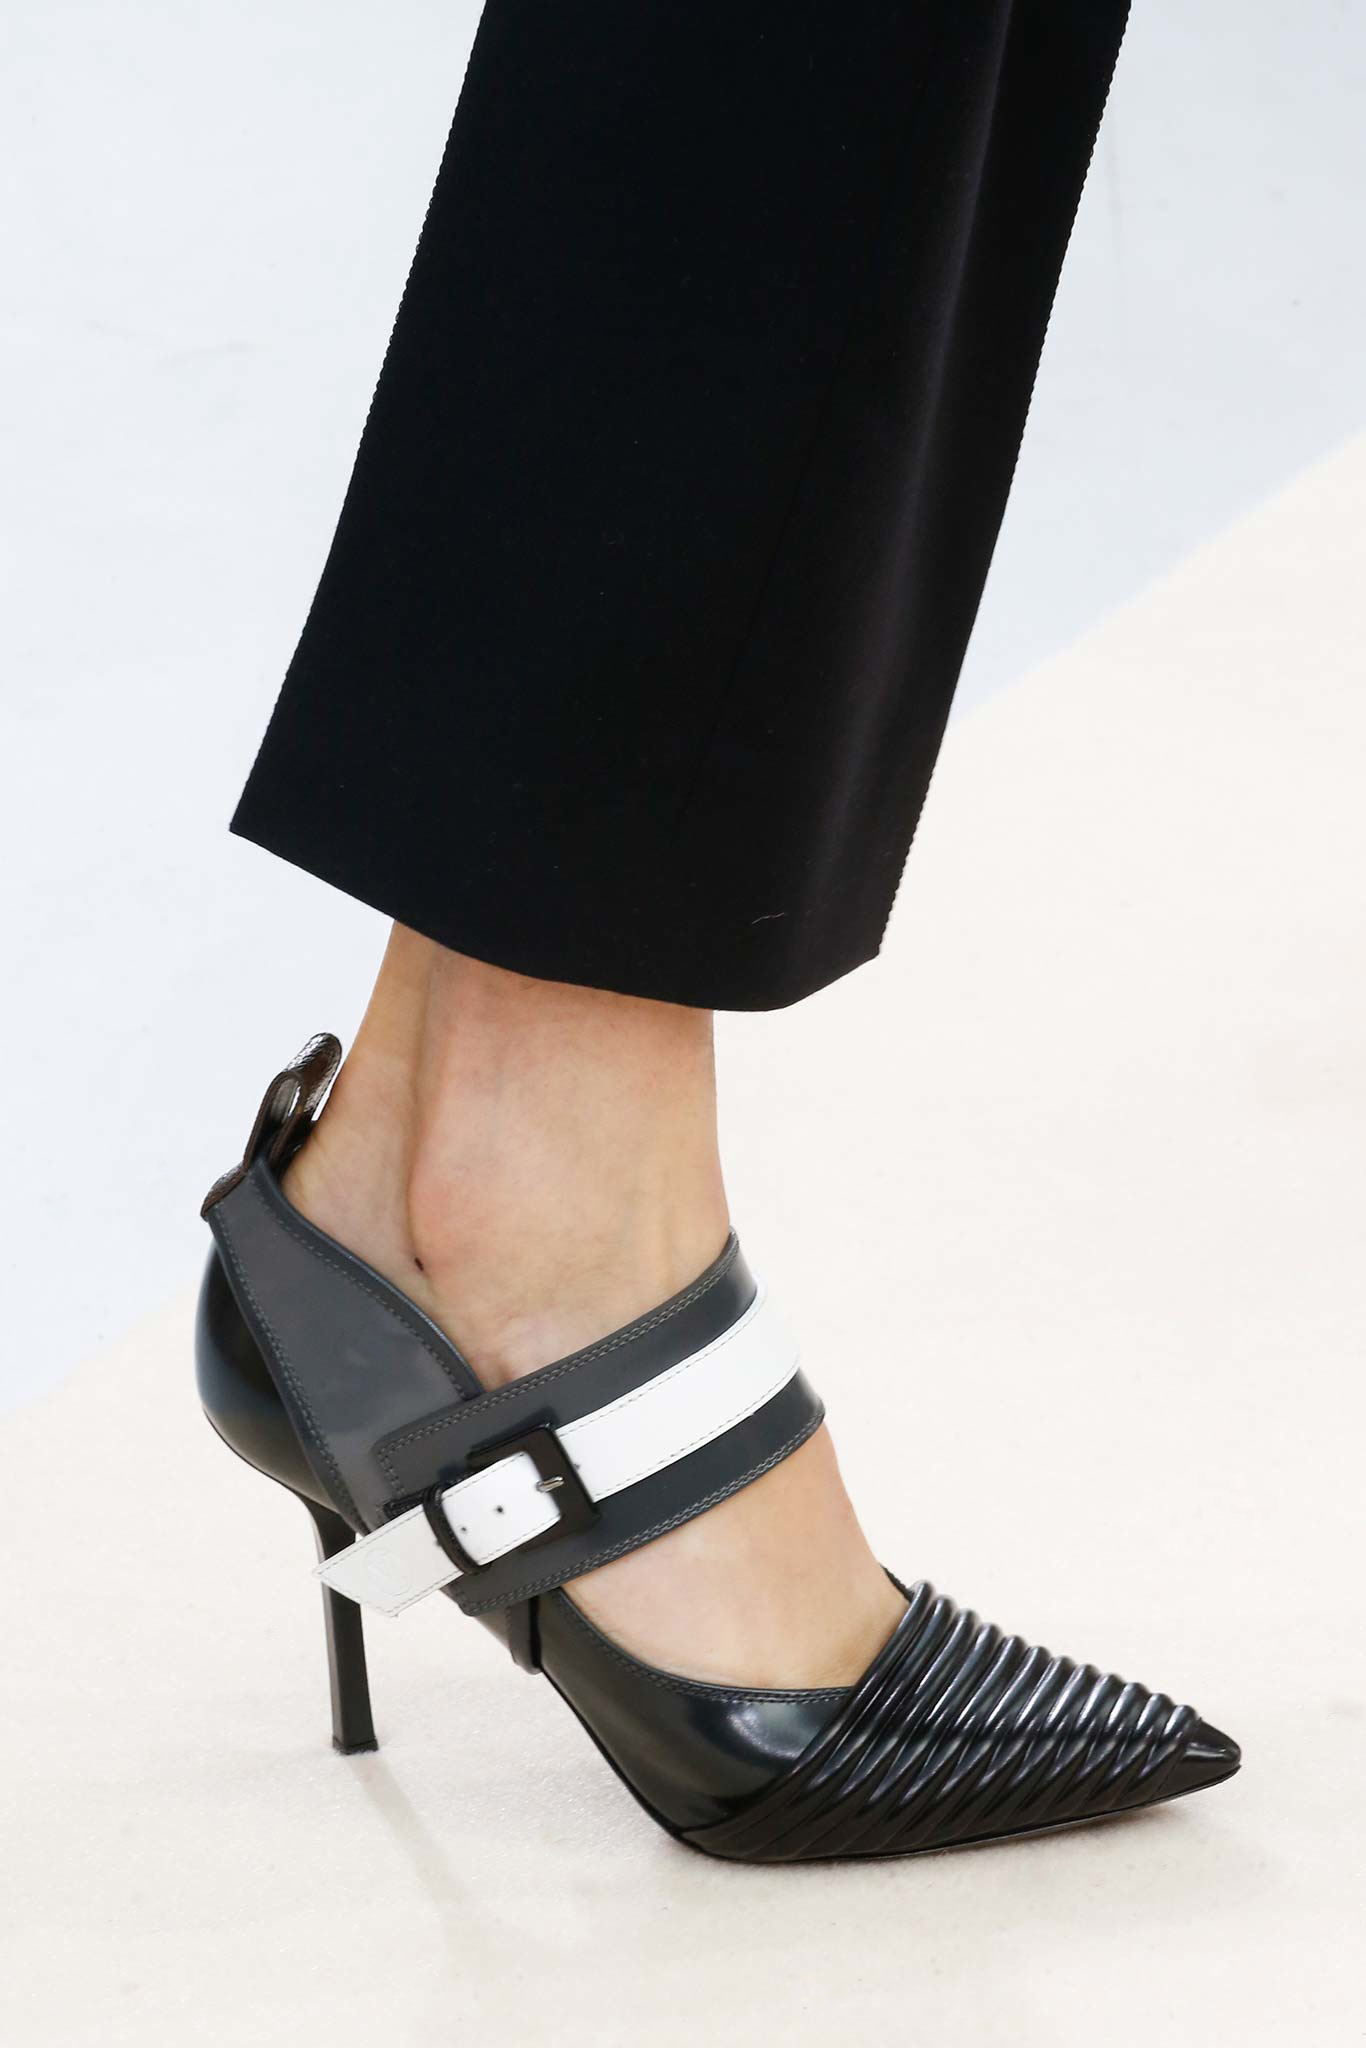 10-01-accessories-trends-fall-2015-mary-janes.jpg